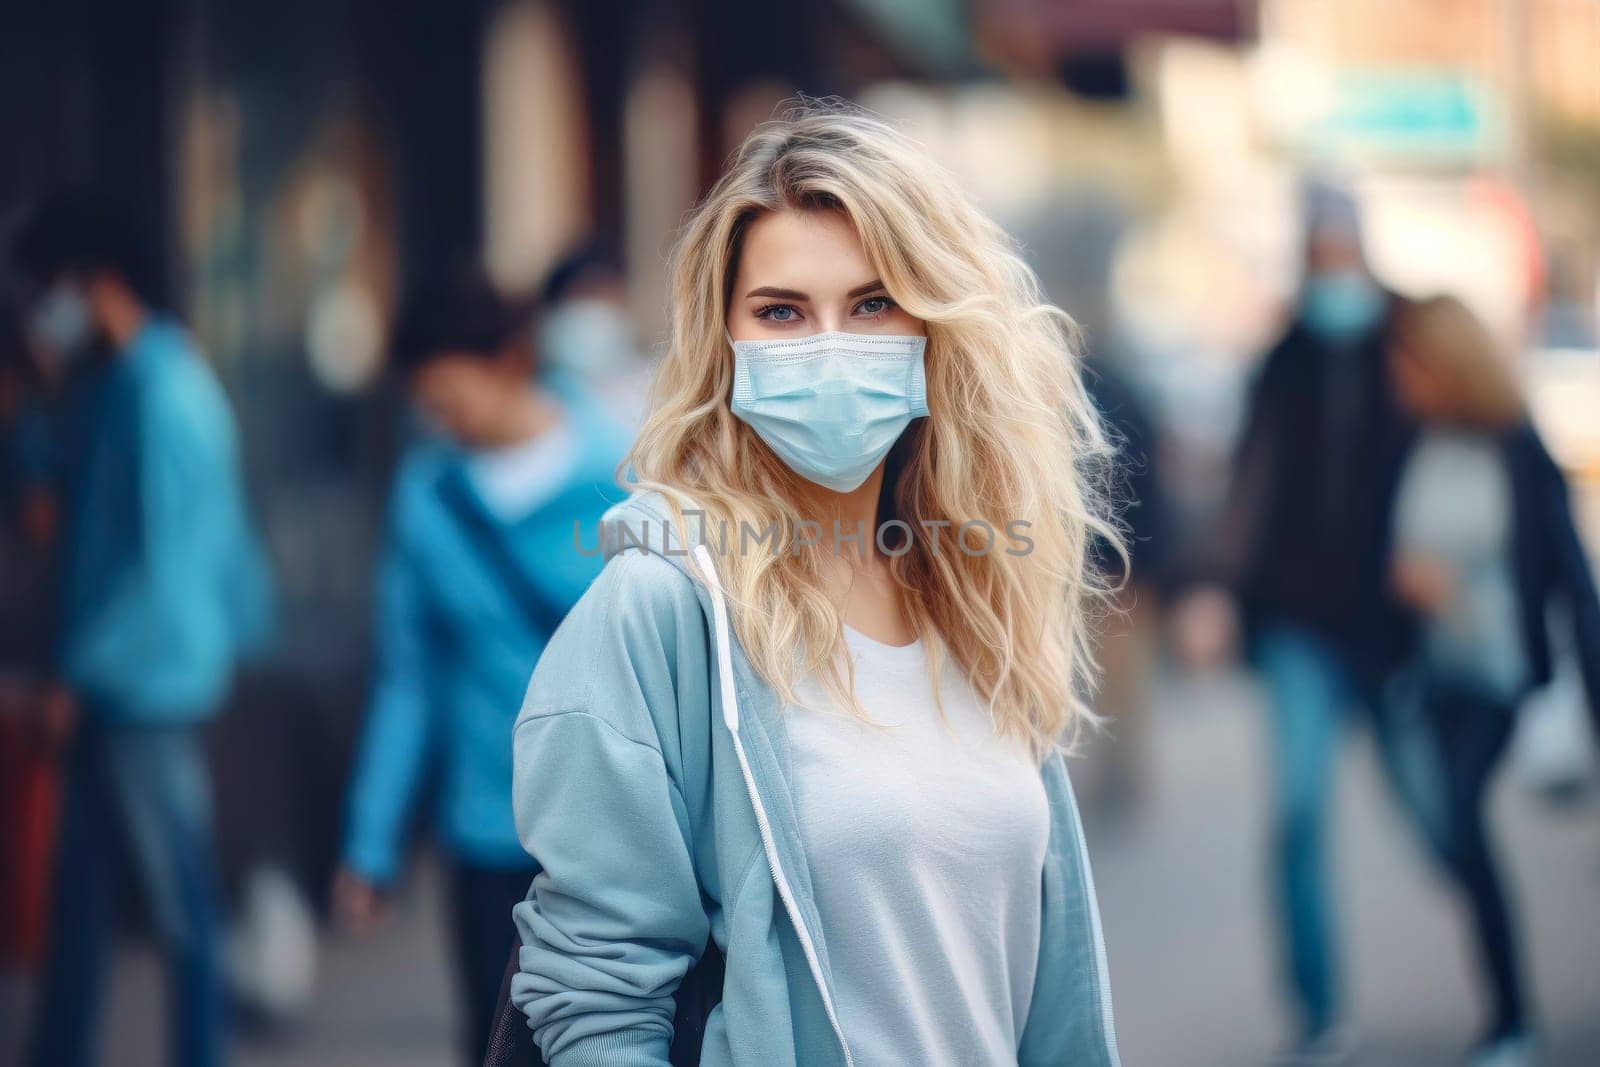 A powerful image capturing a girl wearing a medical mask as she walks through the city during the pandemic.